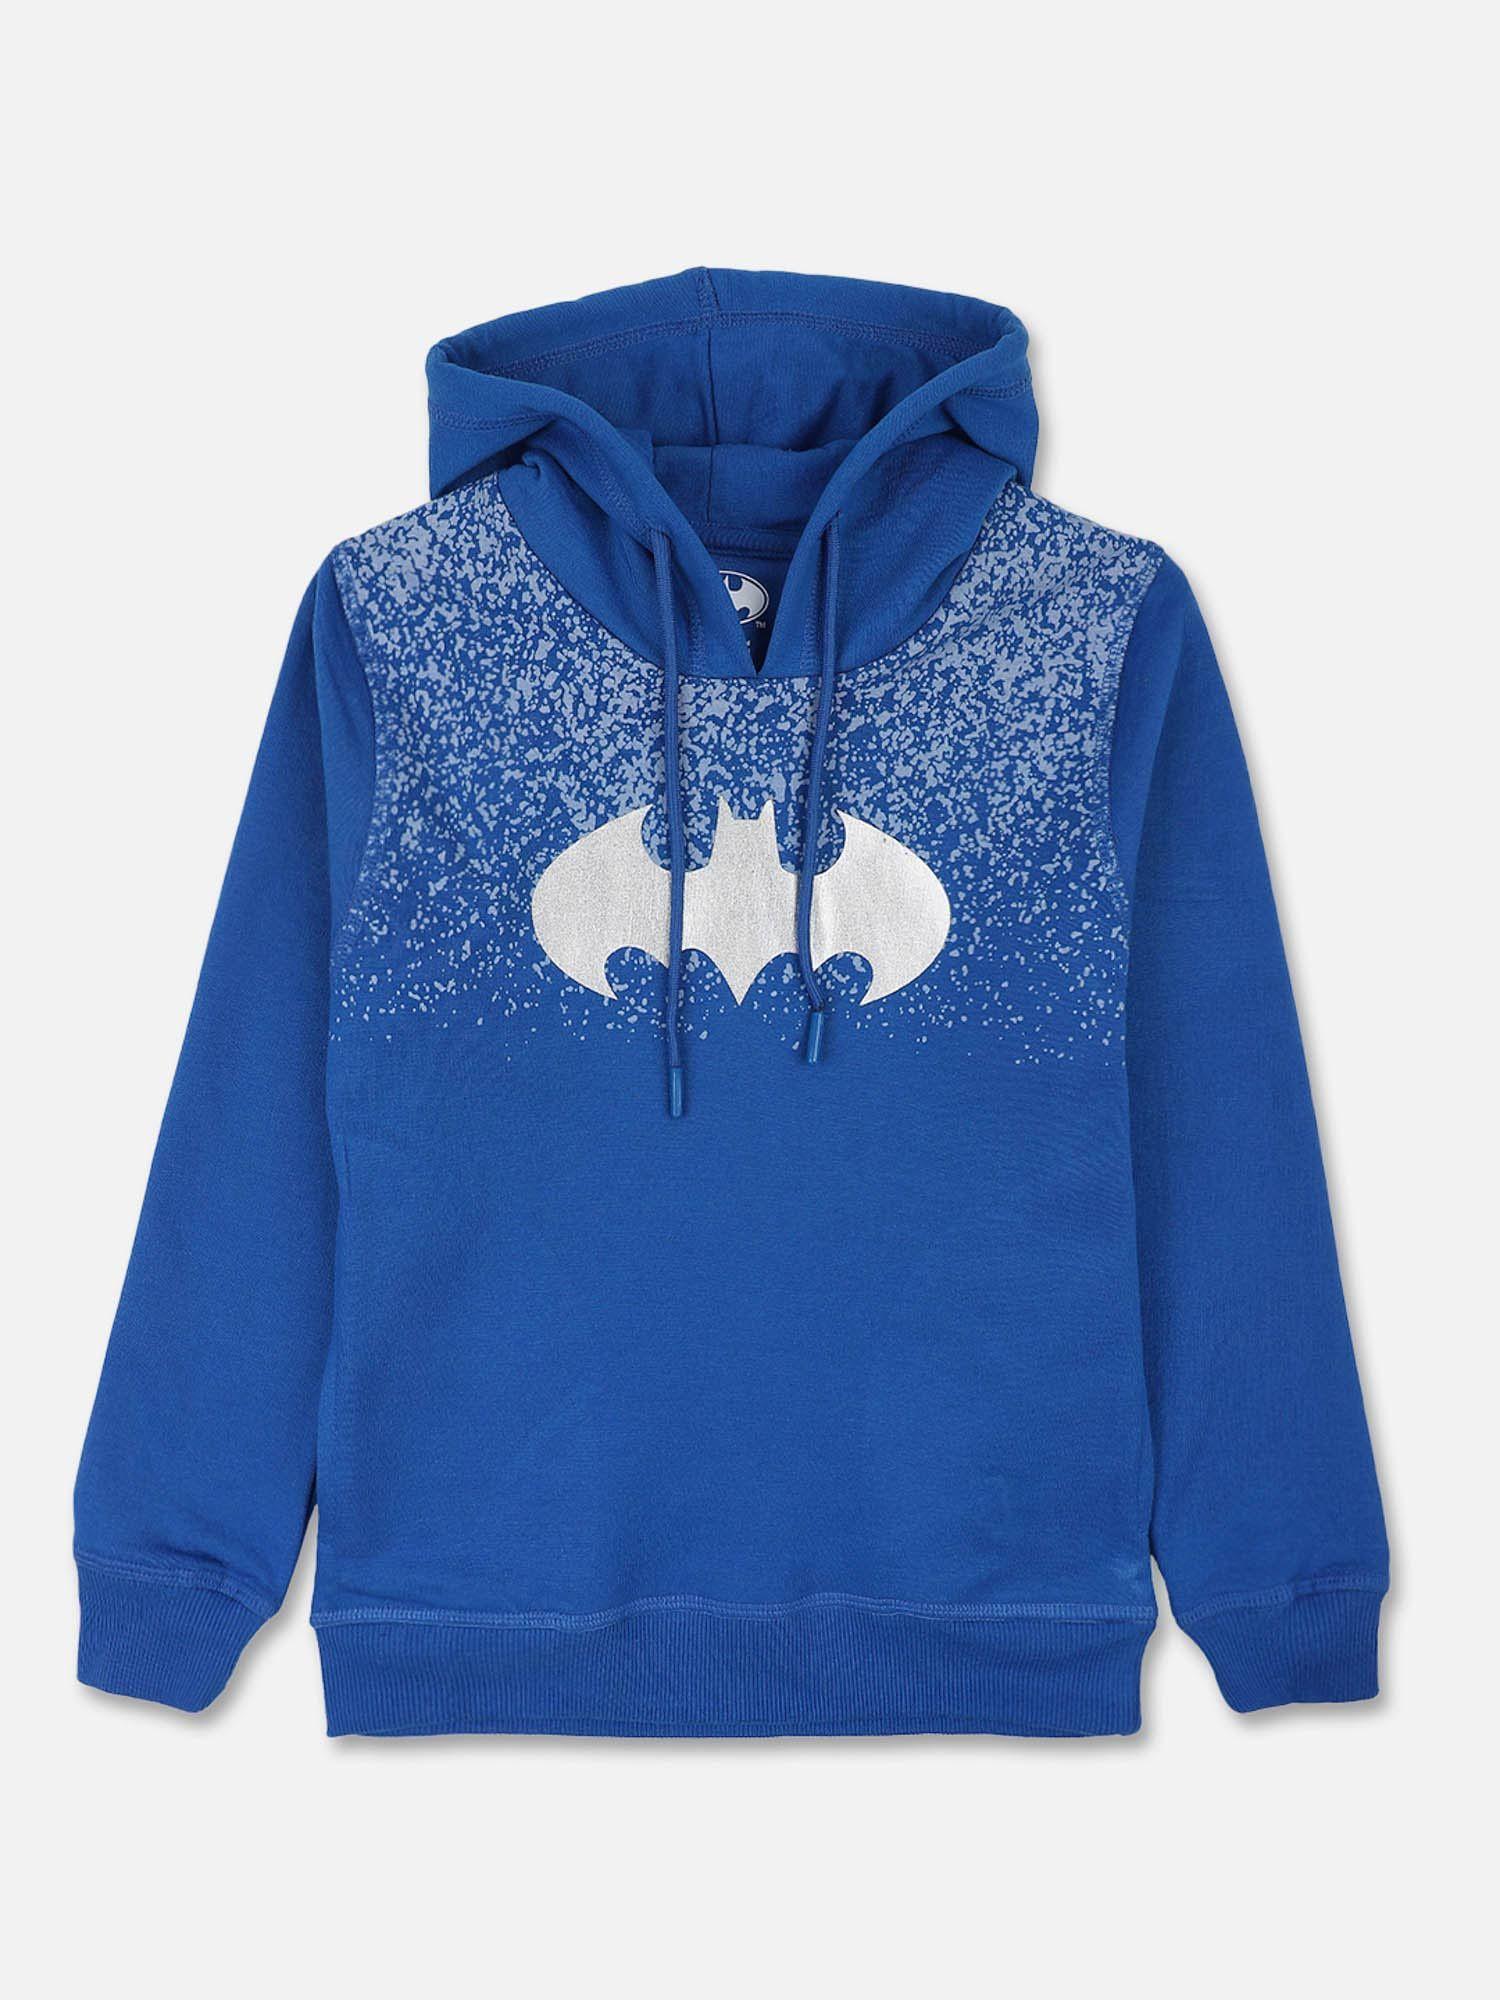 batman featured hoodie for boys